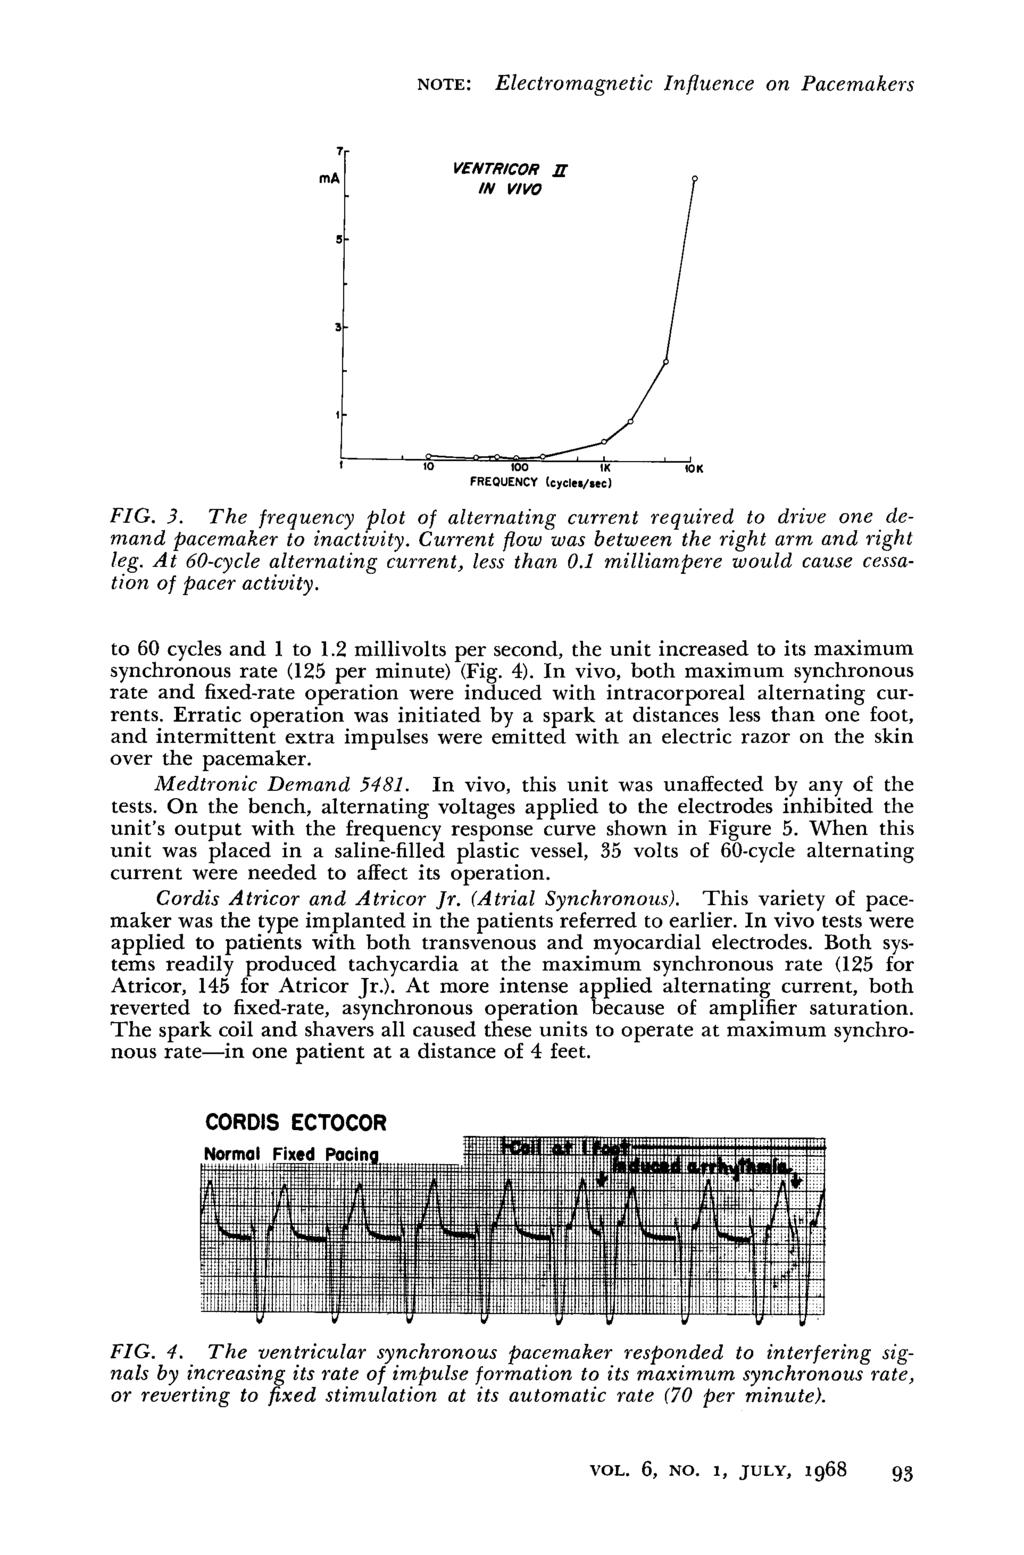 NOTE: Electromagnetic Znfluence on Pacemakers ma 7r VENTRCOR N VVO 5-3- - 0- -,^ to 60 cycles and 1 to 1.